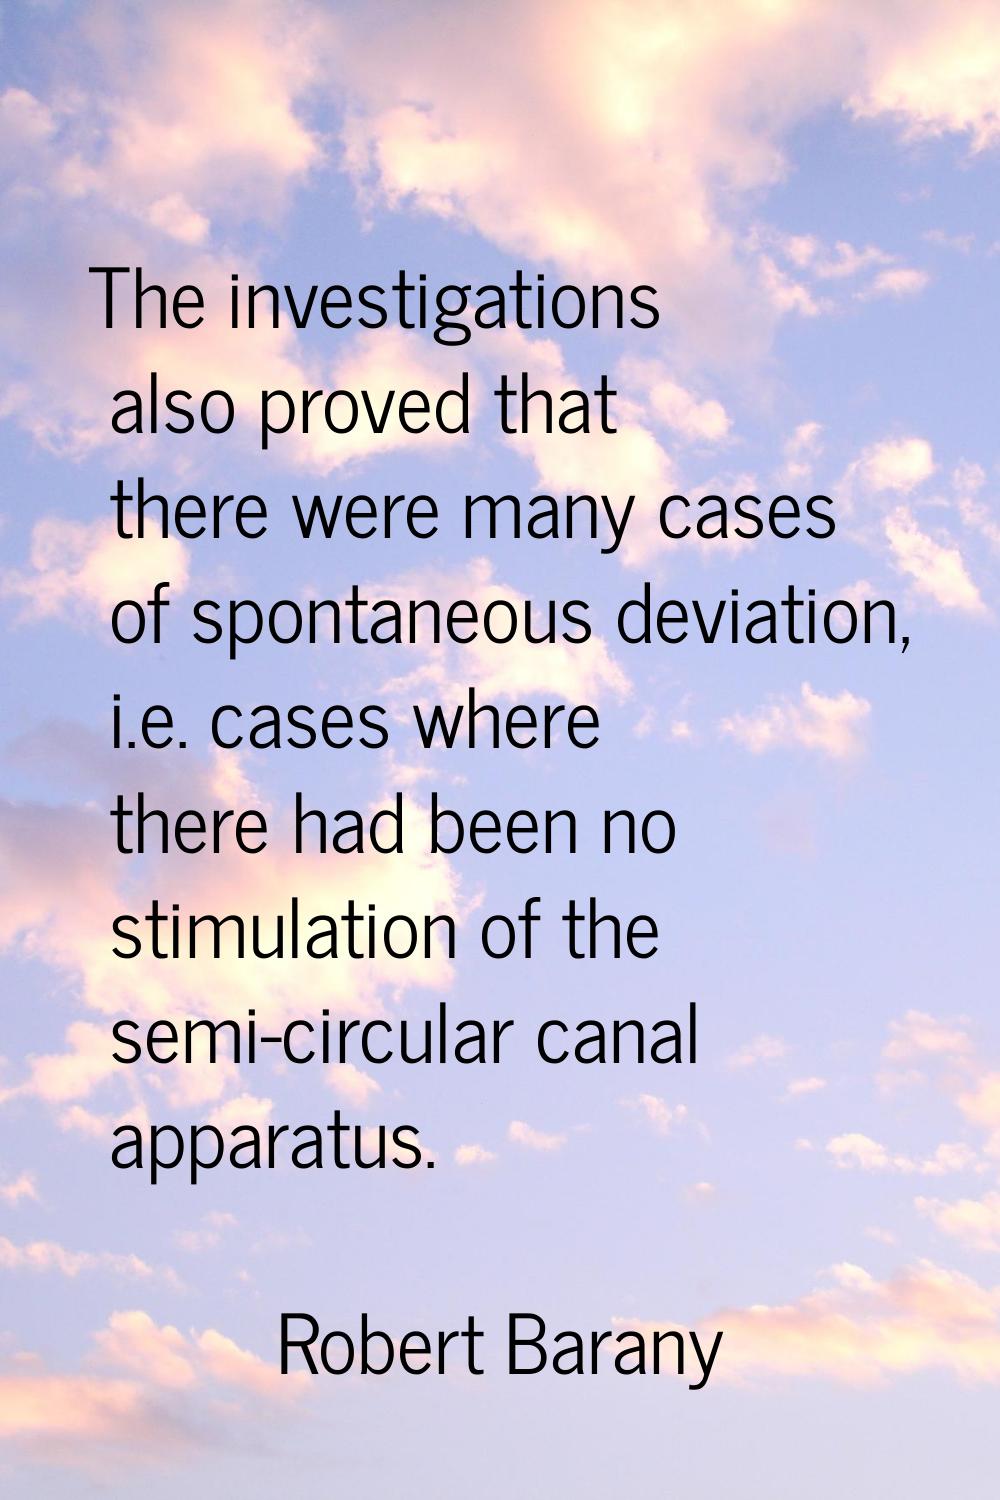 The investigations also proved that there were many cases of spontaneous deviation, i.e. cases wher